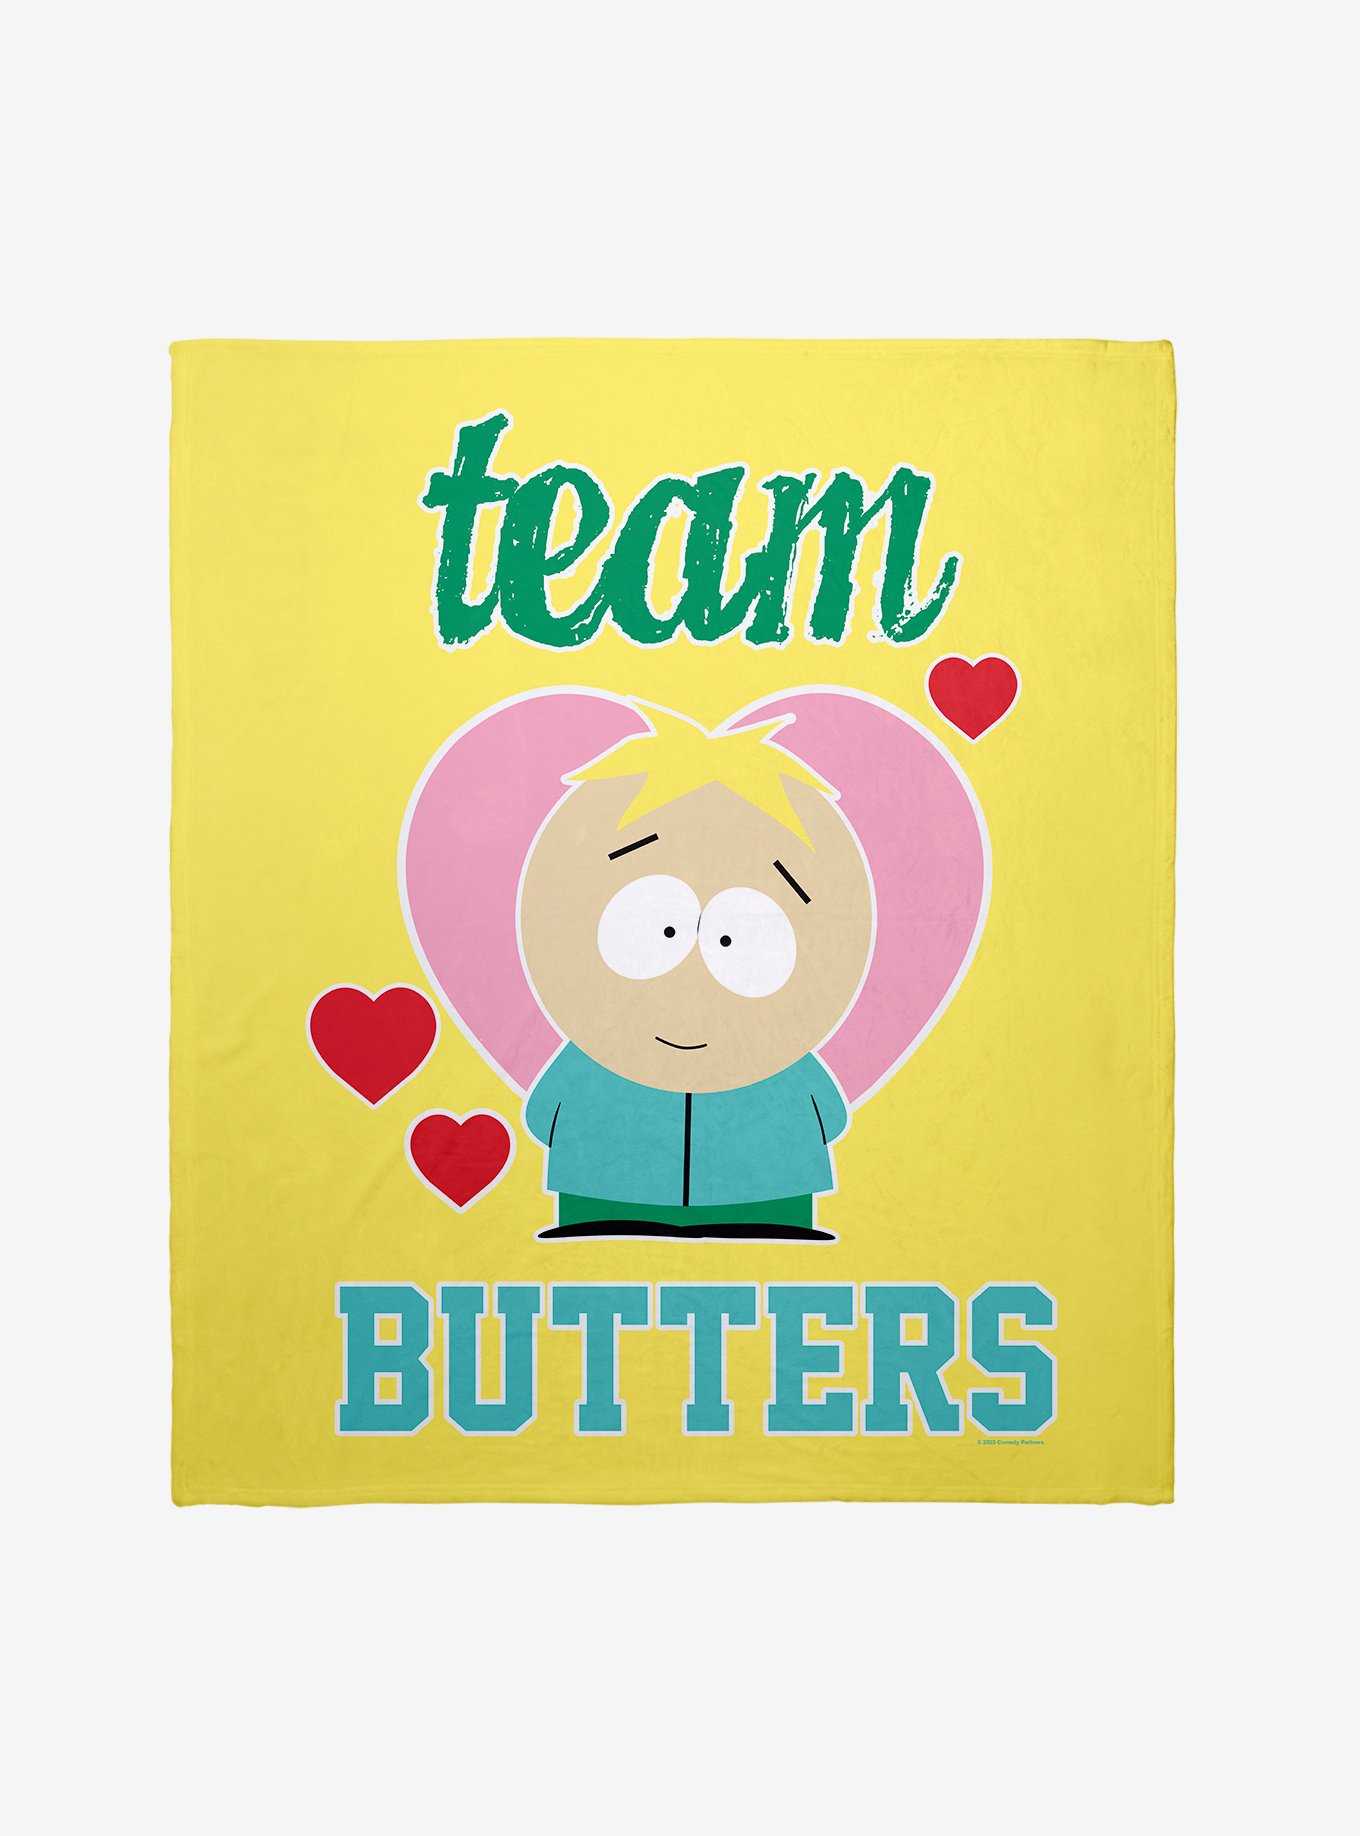 South Park Goth Team Butters Throw Blanket, , hi-res